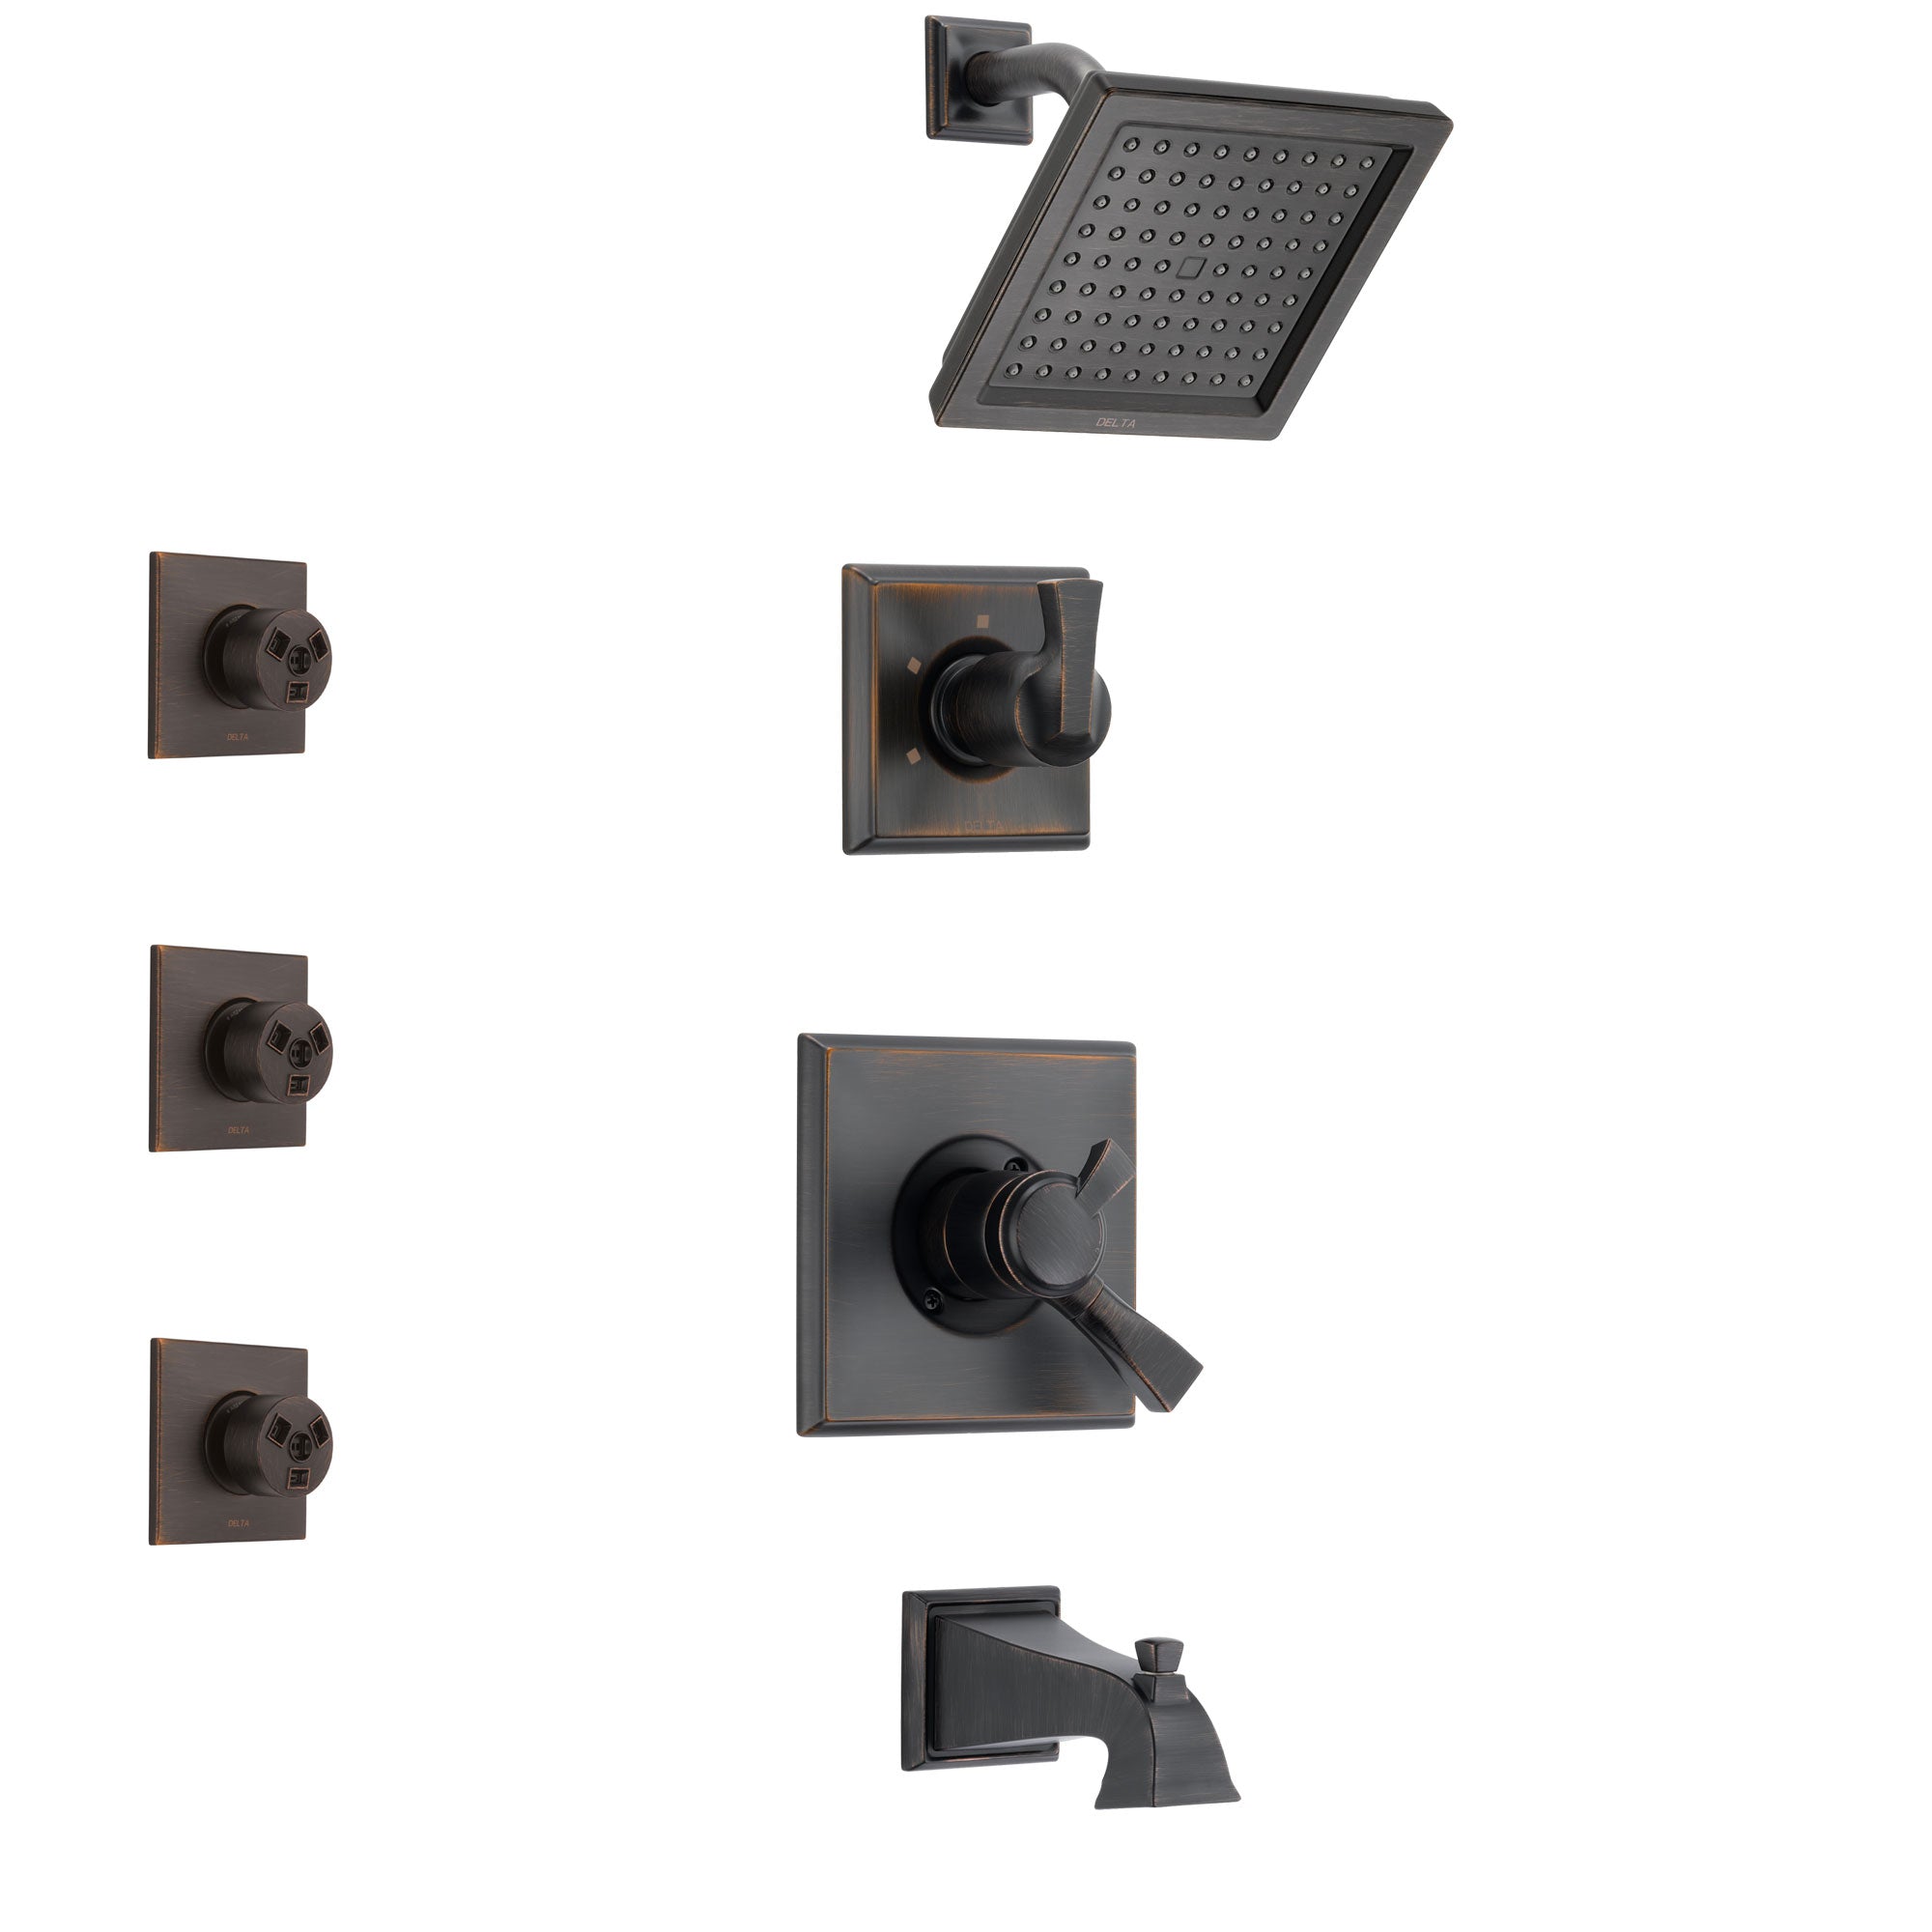 Delta Dryden Venetian Bronze Finish Tub and Shower System with Dual Control Handle, 3-Setting Diverter, Showerhead, and 3 Body Sprays SS174511RB1